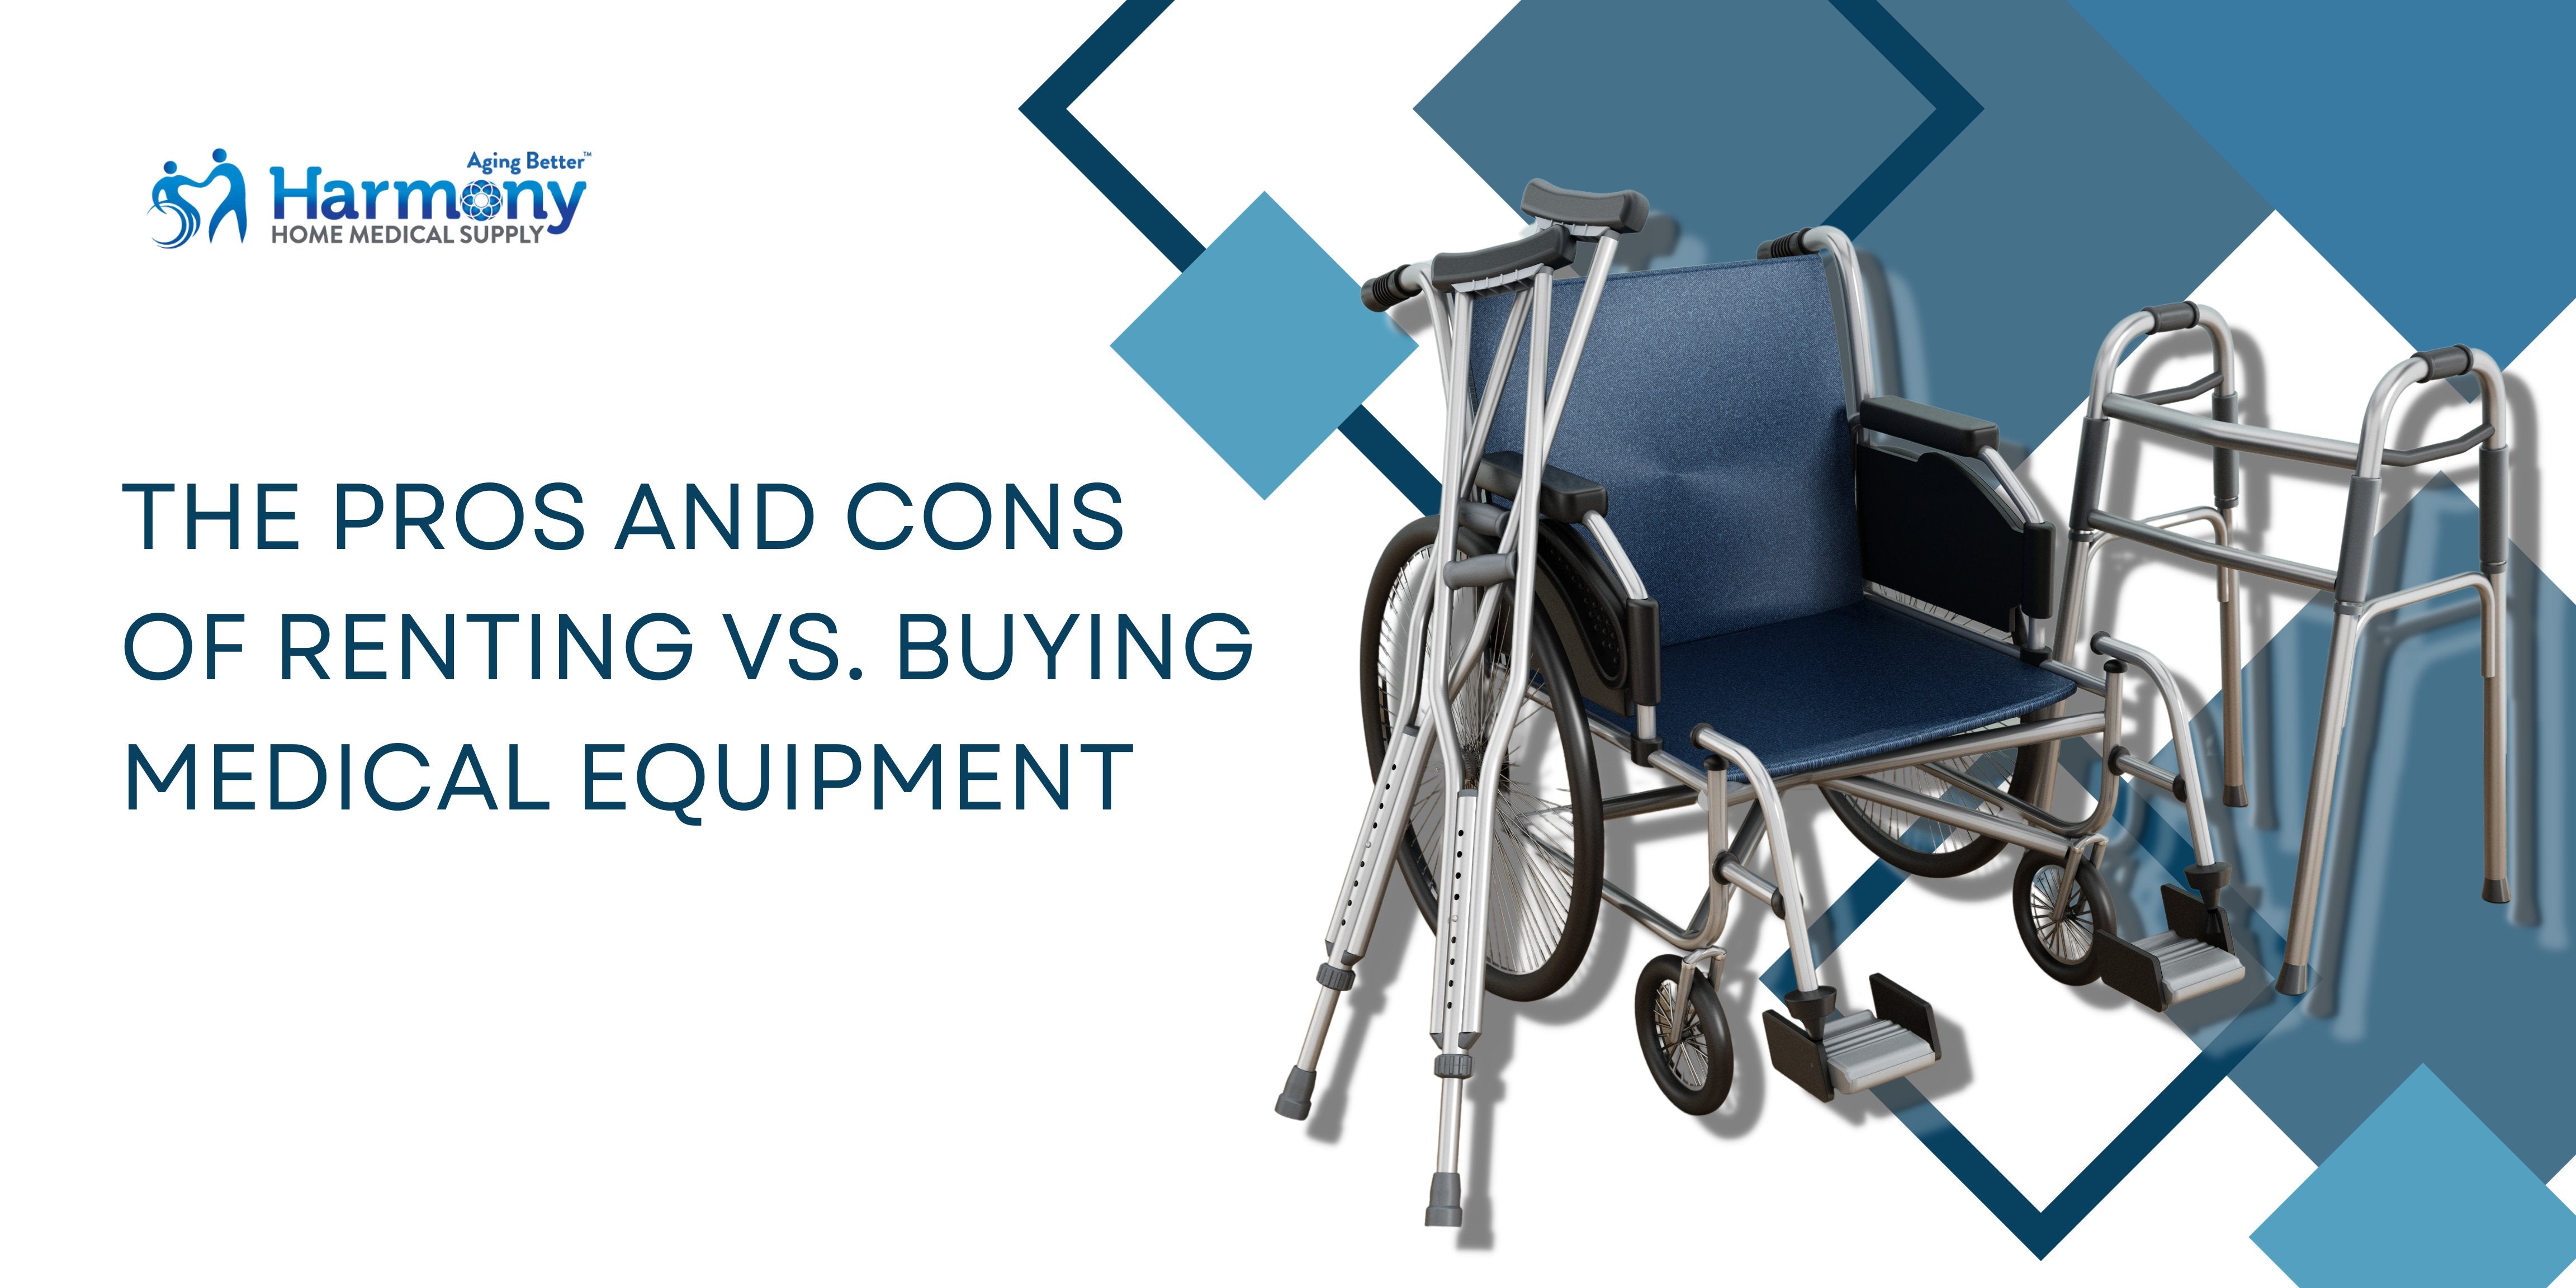 The Pros and Cons of Renting vs. Buying Medical Equipment